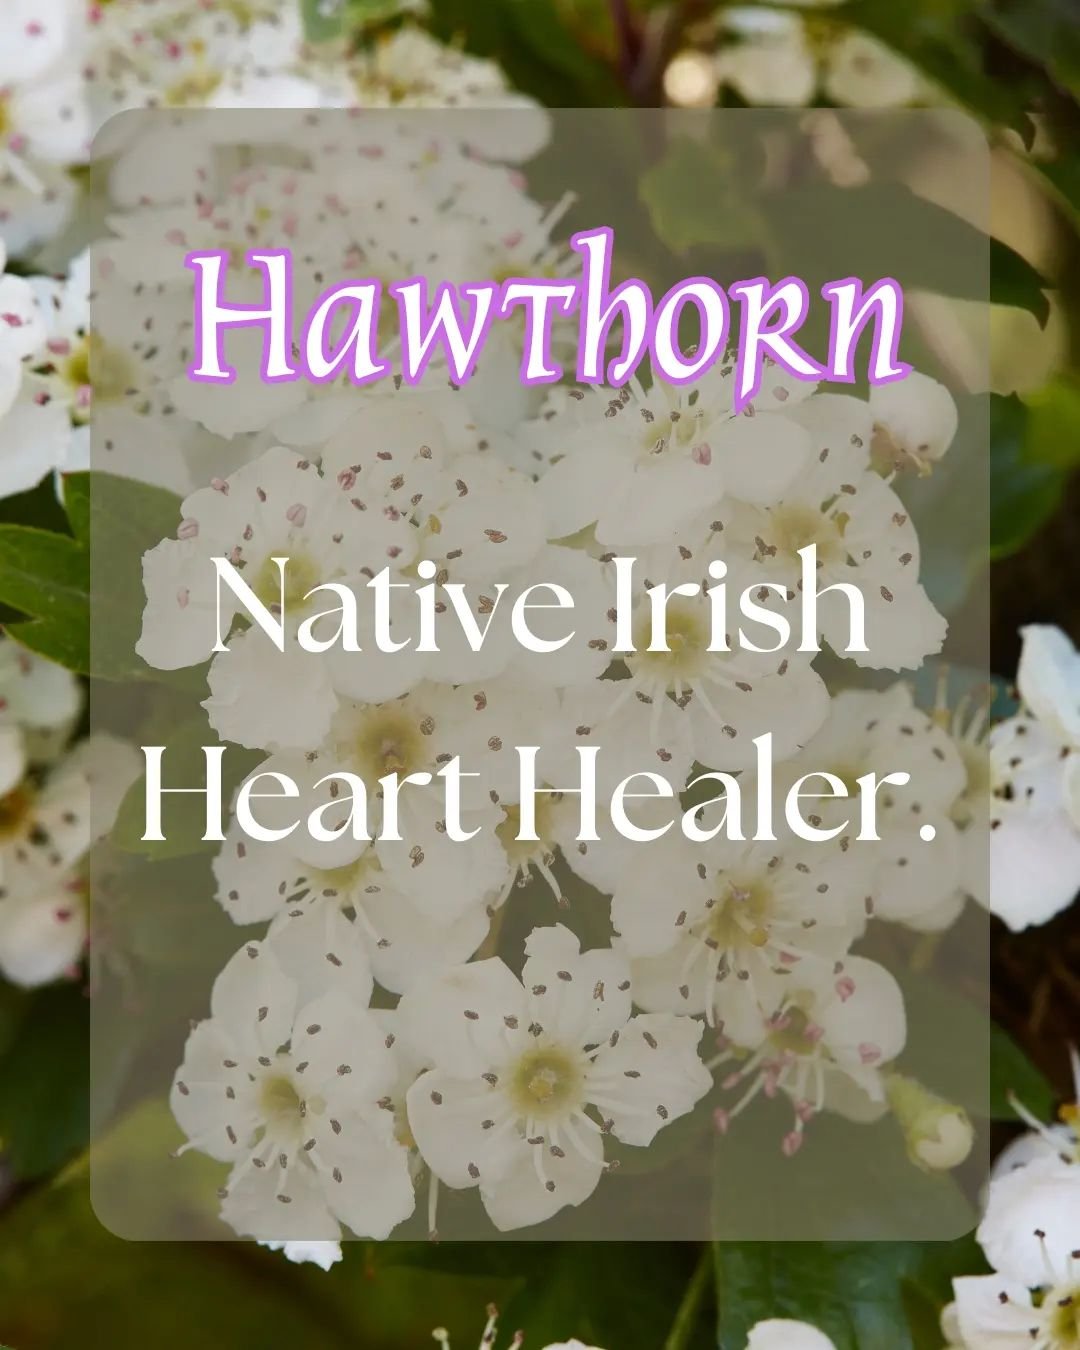 Hawthorn: Native Irish Heart Healer. 

Hawthorn heals the heart physically, spiritually and emotionally. In my seeing it is the ultimate ally for these times which are bringing us to the depths of grief as we bear witnesss to what is unfolding across